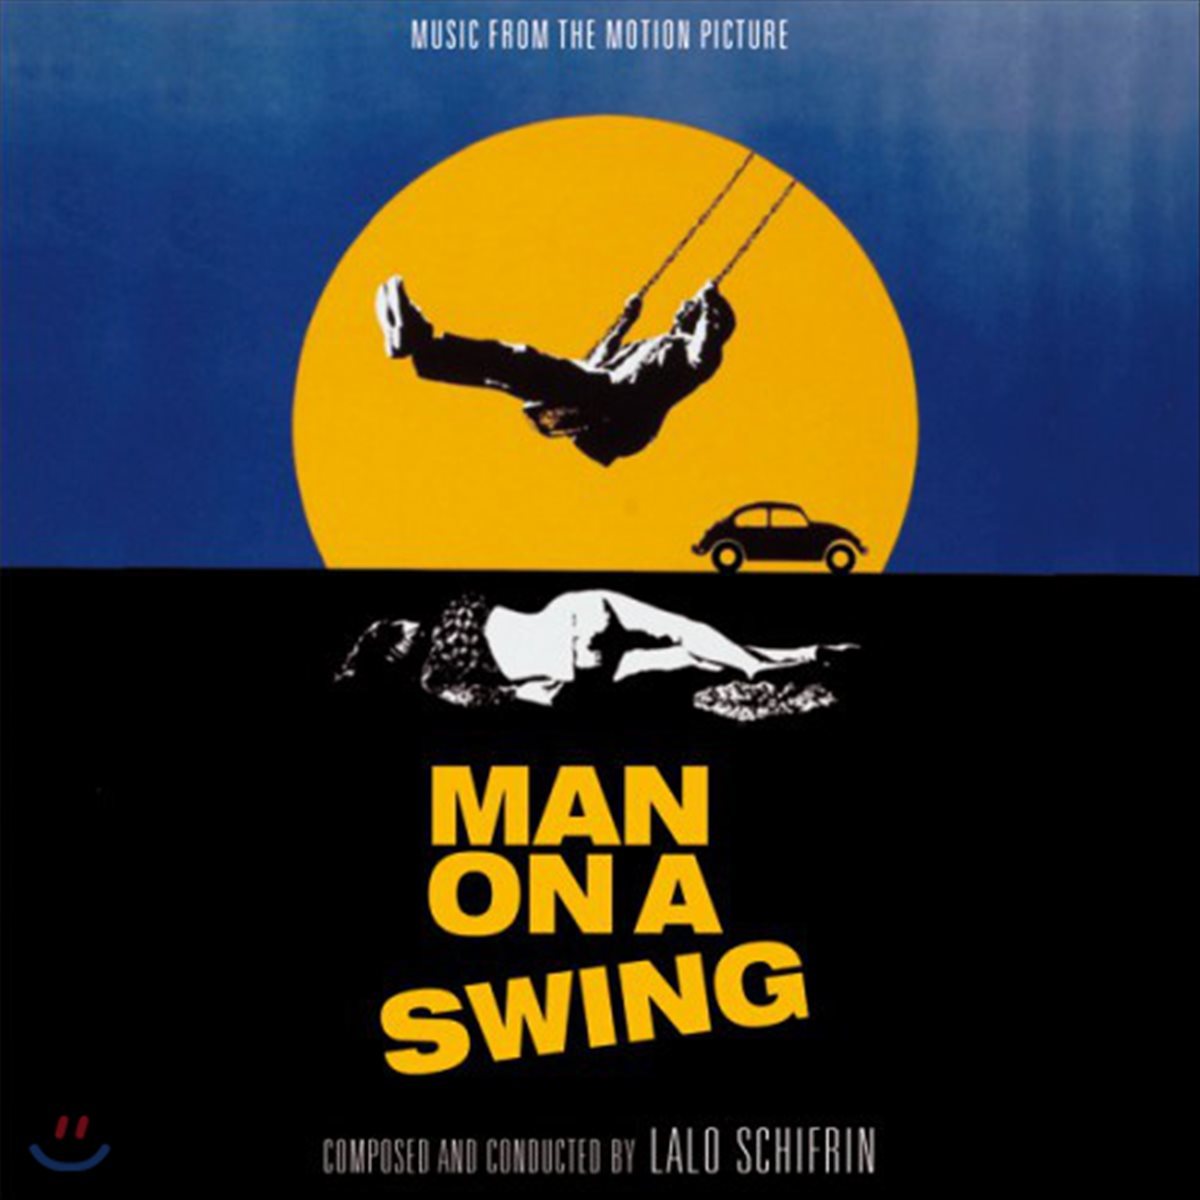 Man on a Swing / The President Analyst 영화음악 (OST BY Lalo Schifrin)